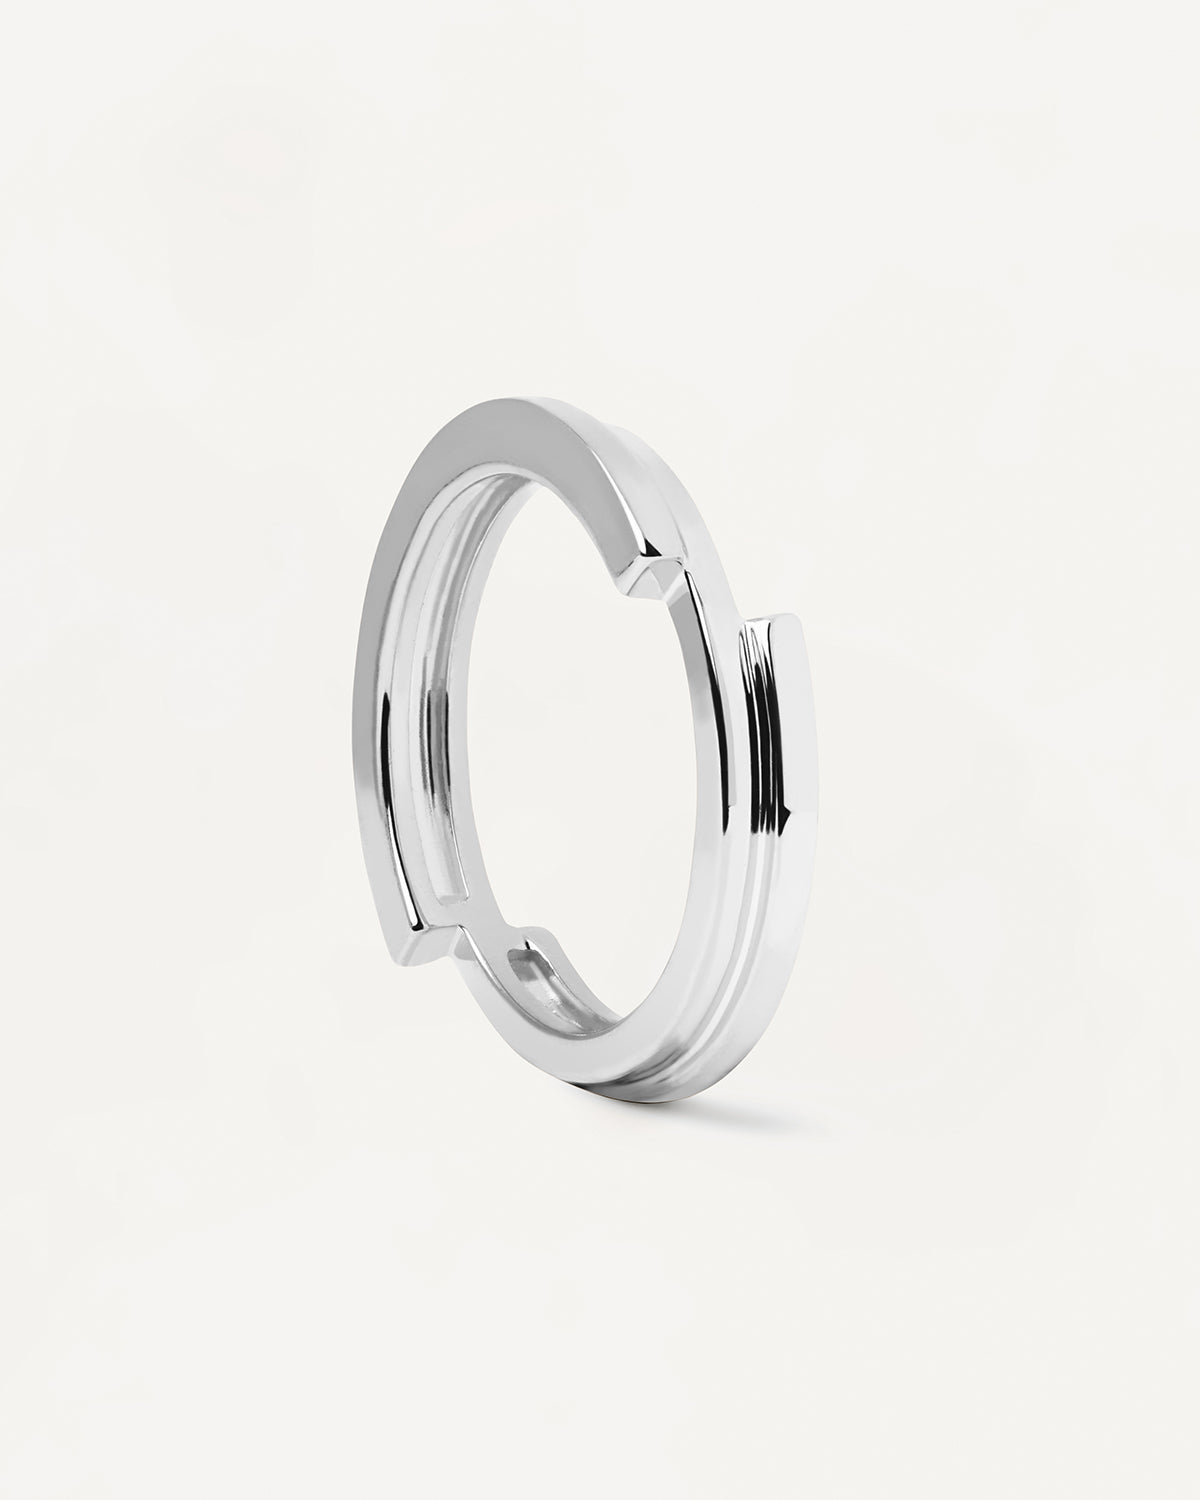 2023 Selection | Genesis Silver Ring. Sterling silver ring with plain asymetric design. Get the latest arrival from PDPAOLA. Place your order safely and get this Best Seller. Free Shipping.